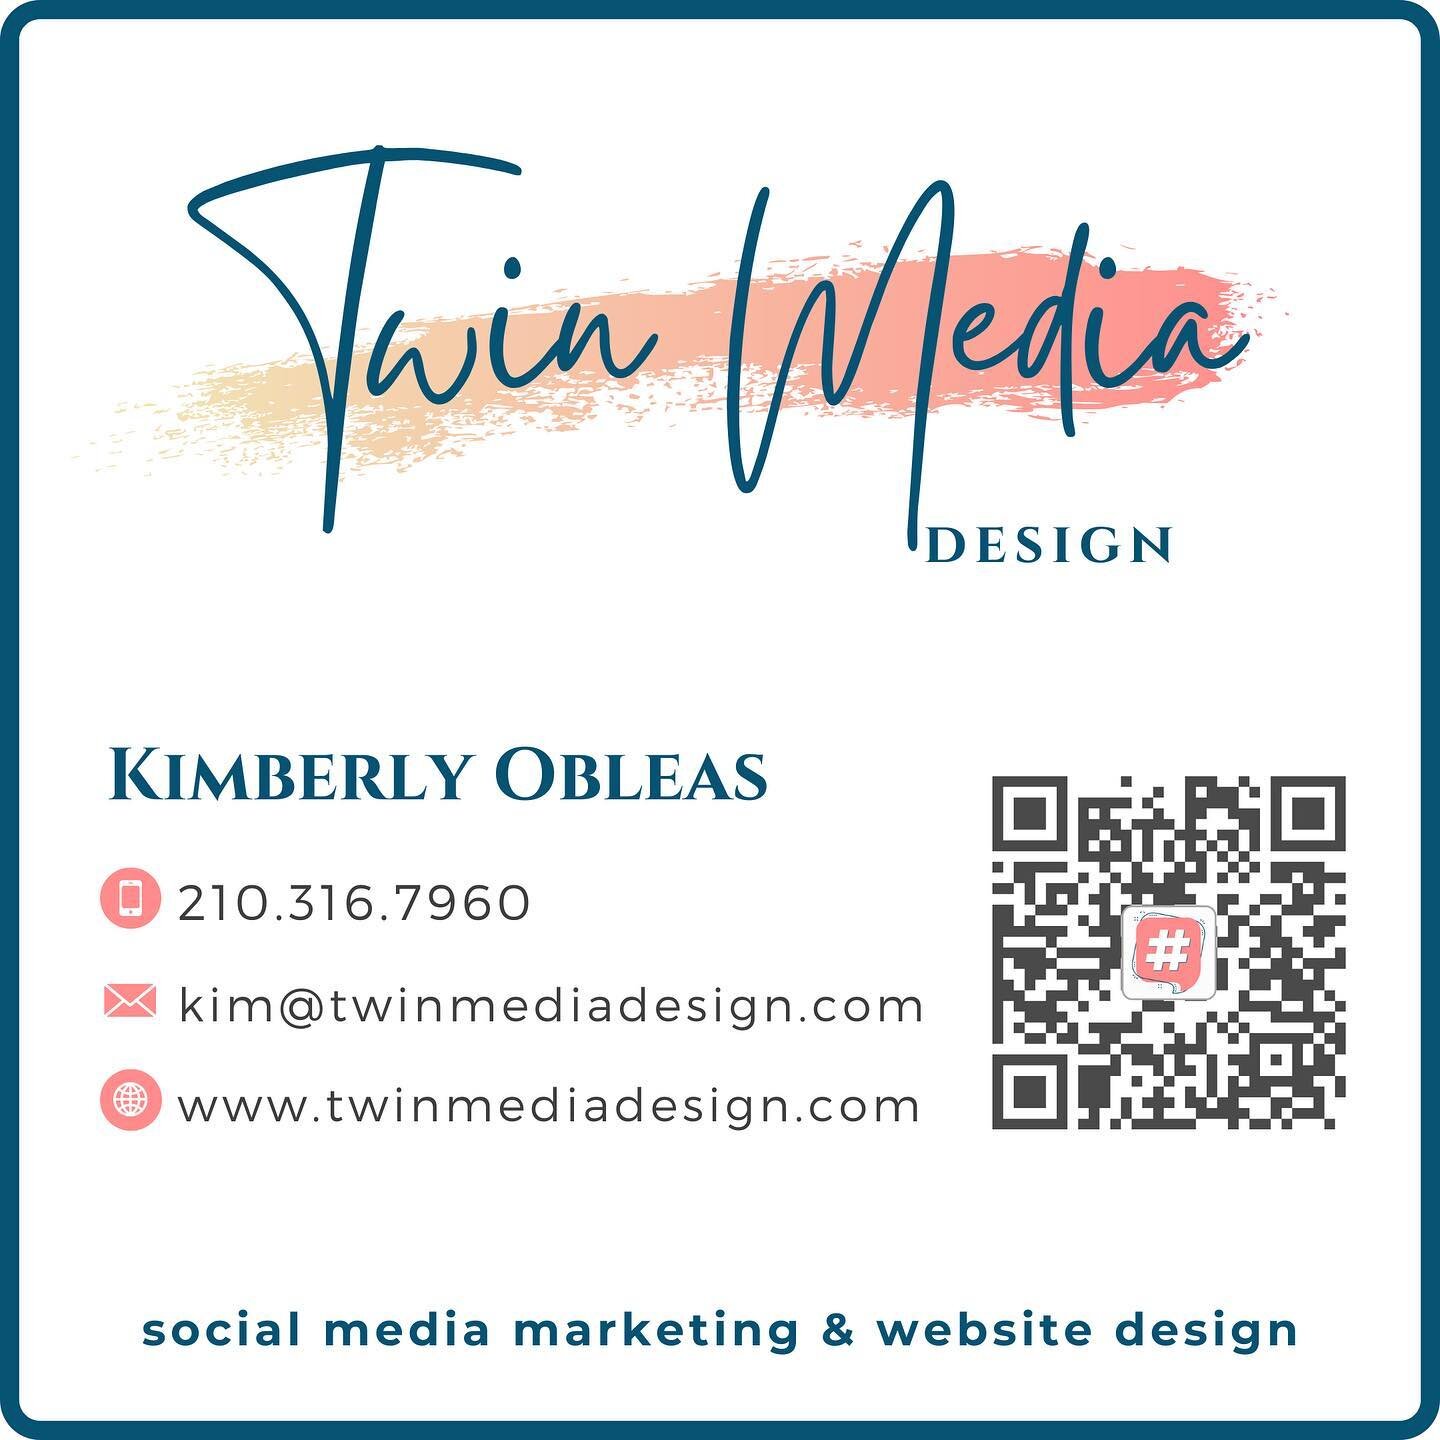 Scan my QR code or contact me at twinmediadesign.com to schedule a consultation.➡️ (Link in bio) 

#socialmediamarketing #socialmediamarketingservices #squarespace #squarespacedesign #squarespacedesigner #squarespacewebdesign #smallbusinesslove #smal